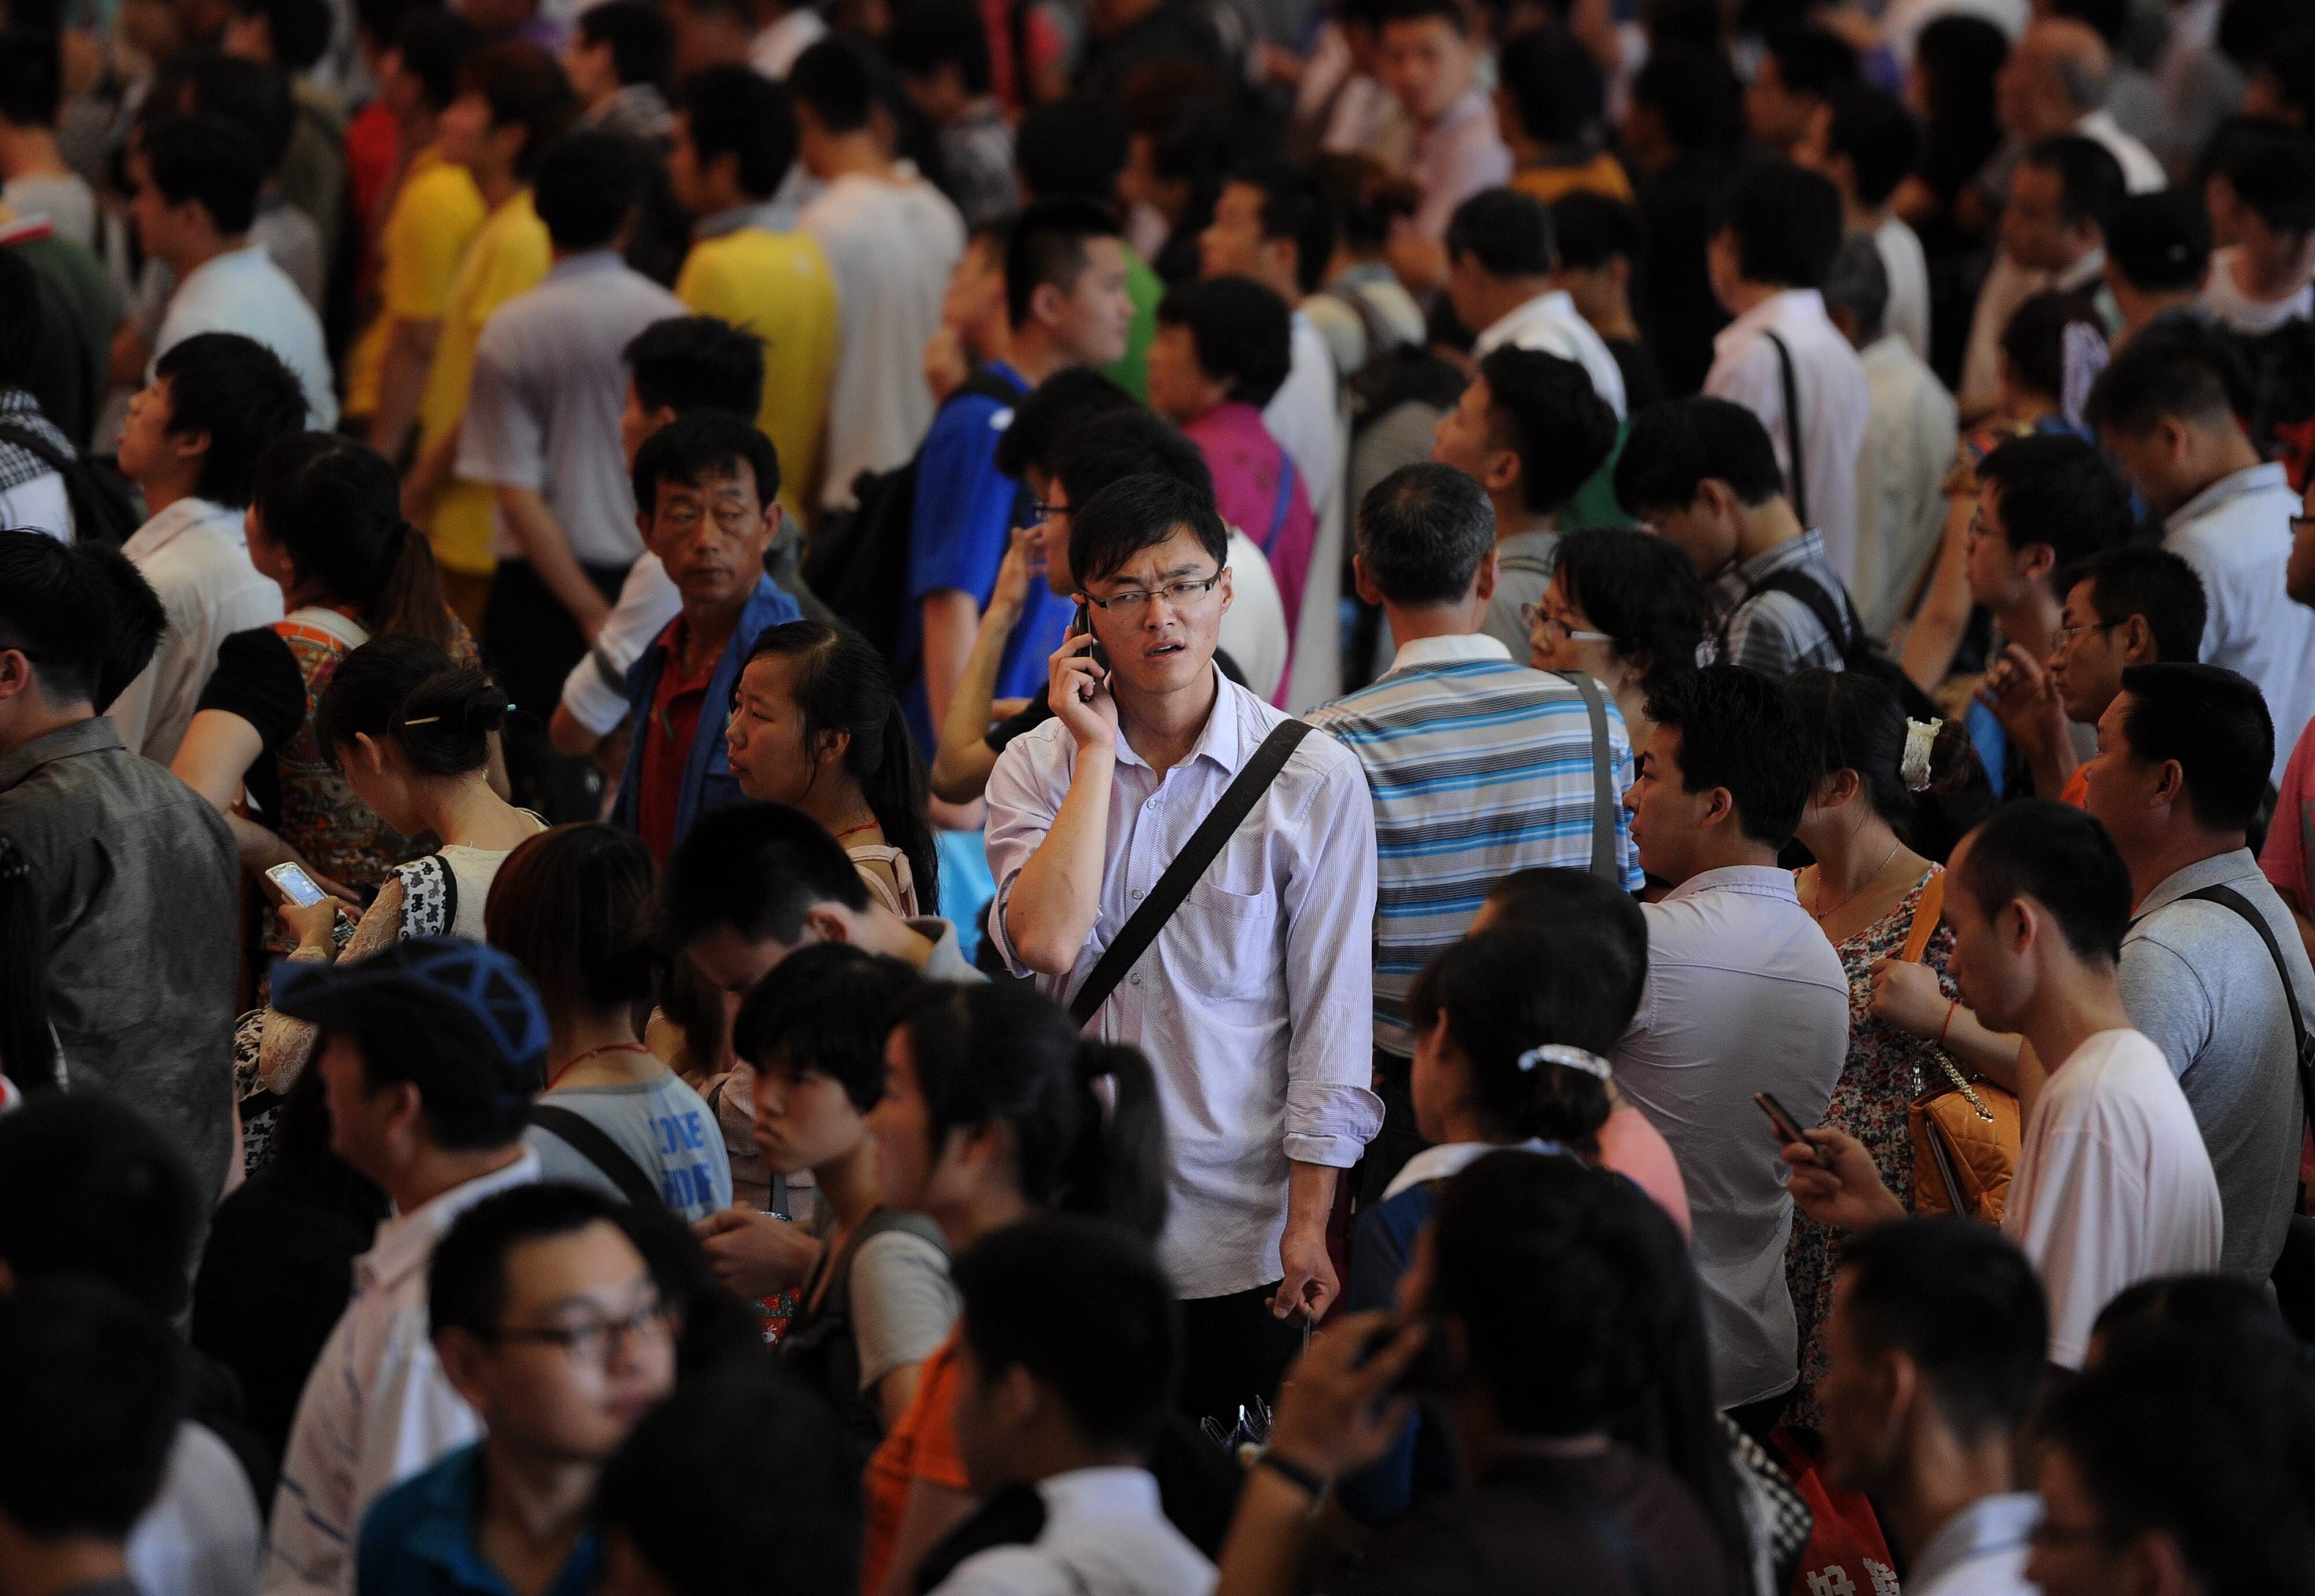 China’s State Council first outlined the plan for the social credit system in 2014 covering individuals, businesses, social interactions and judicial administration, with the system expected to be rolled out by the end of 2020. Photo: AFP